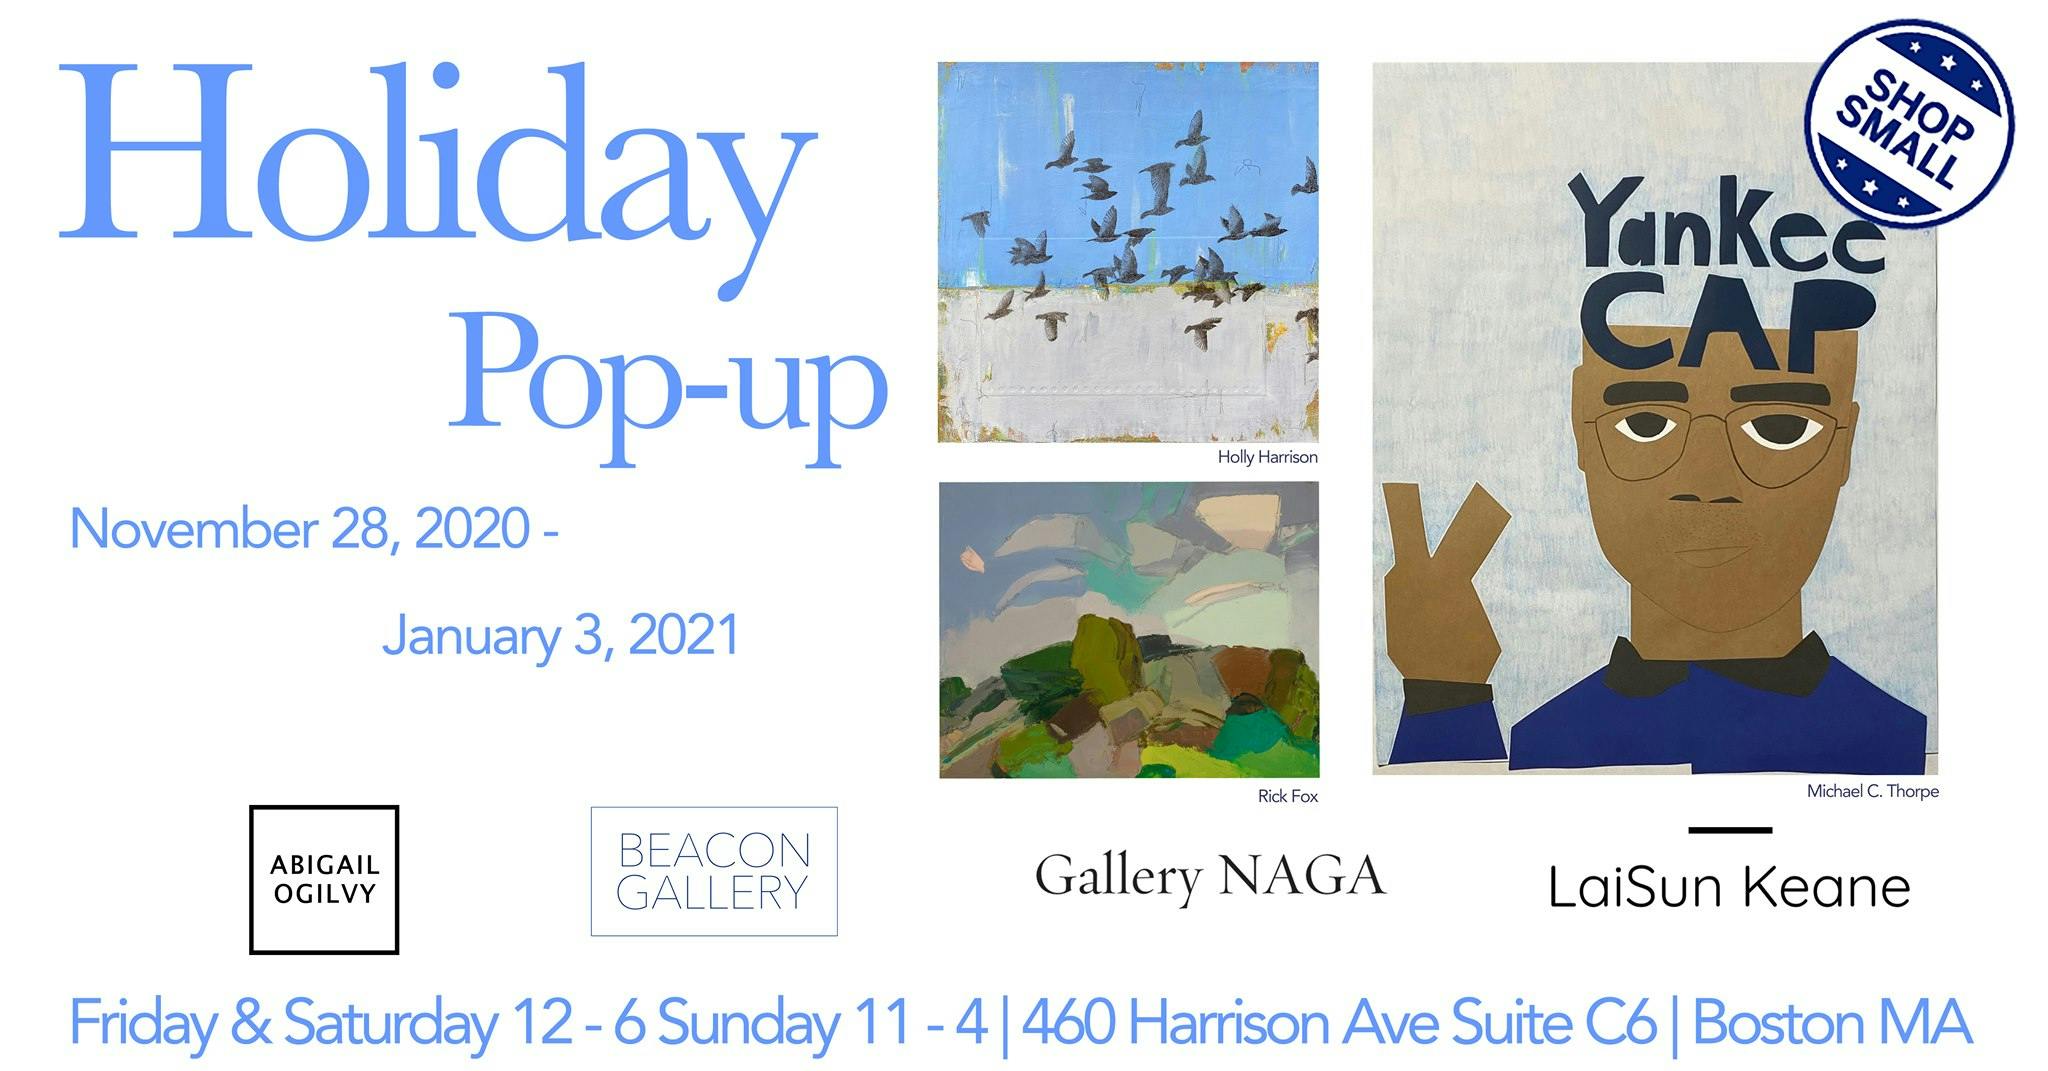 Poster design for Holiday Pop Up in SoWA